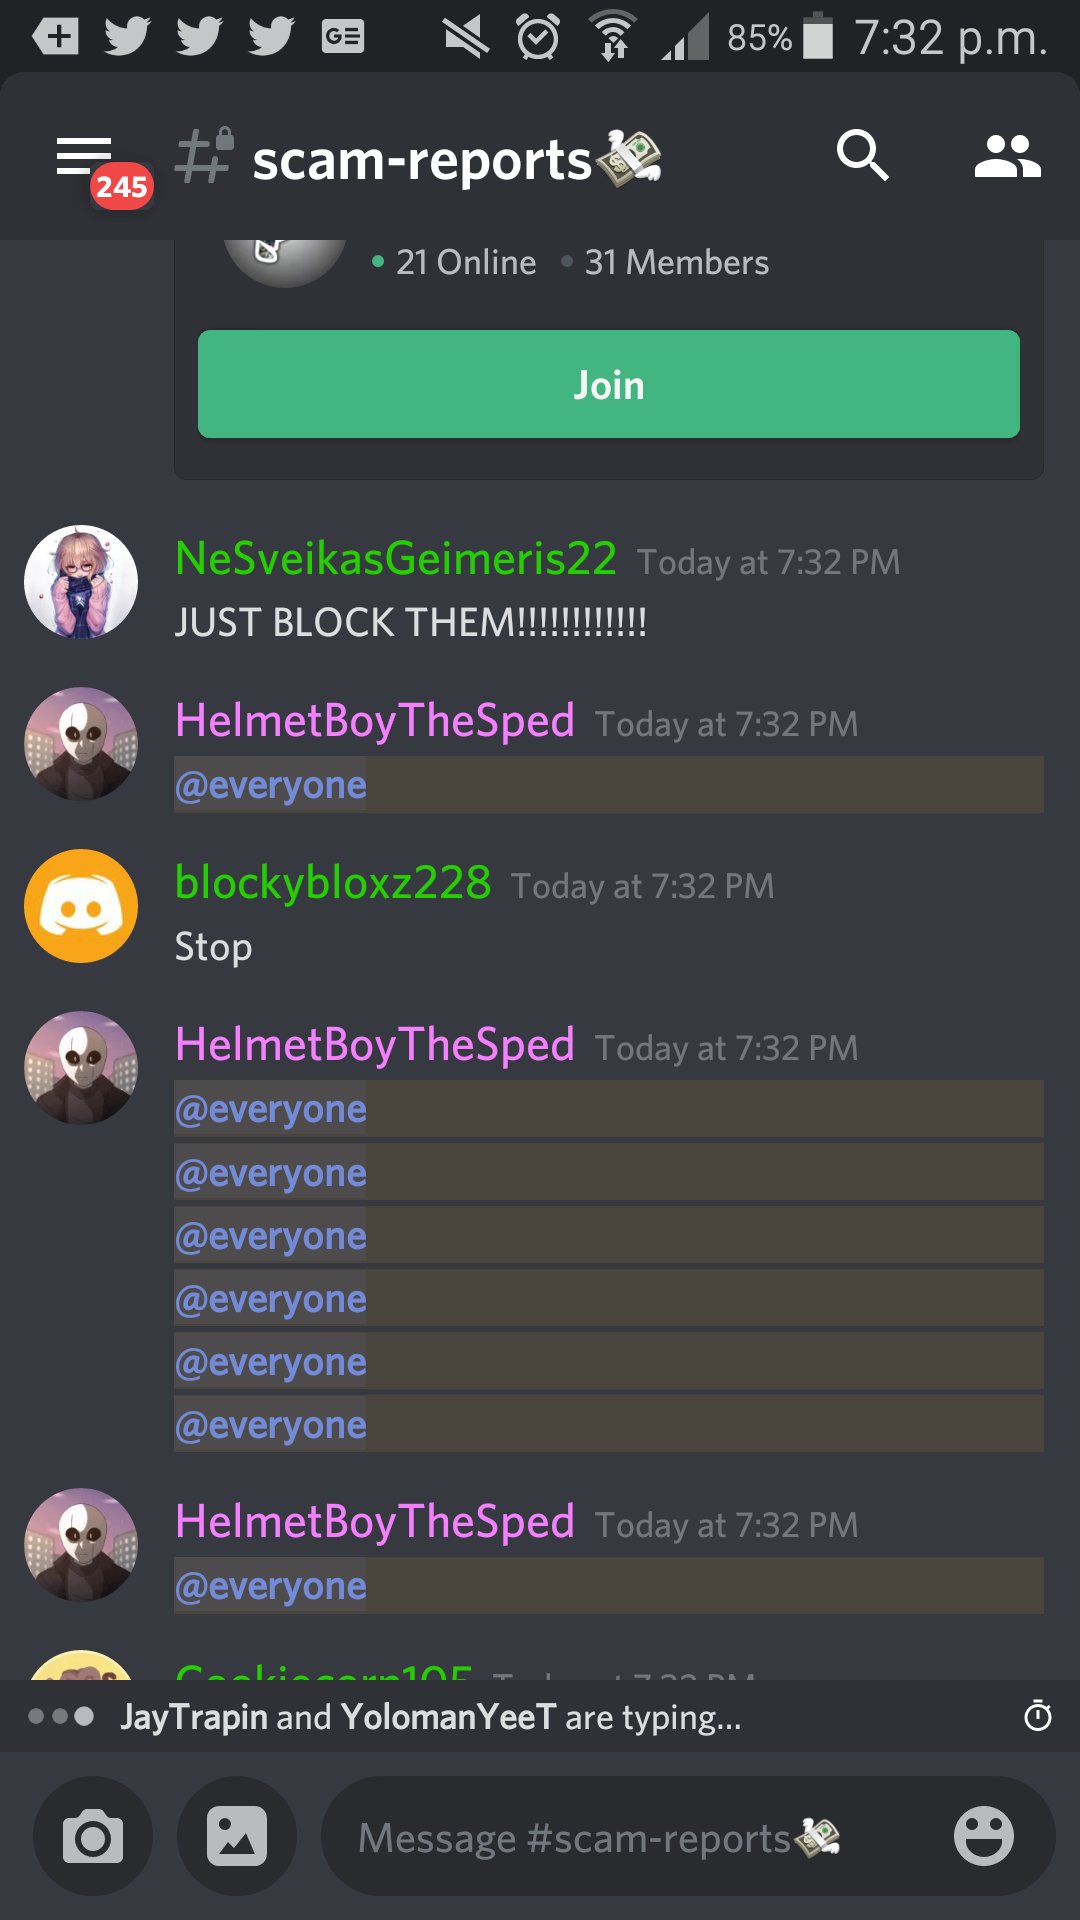 RTC on X: BREAKING NEWS: The PBB reuploaders discord is currently being  raided by unknown sources. They are spamming NSFW content and everyones in  the chat. Some say “they deserve it”, others